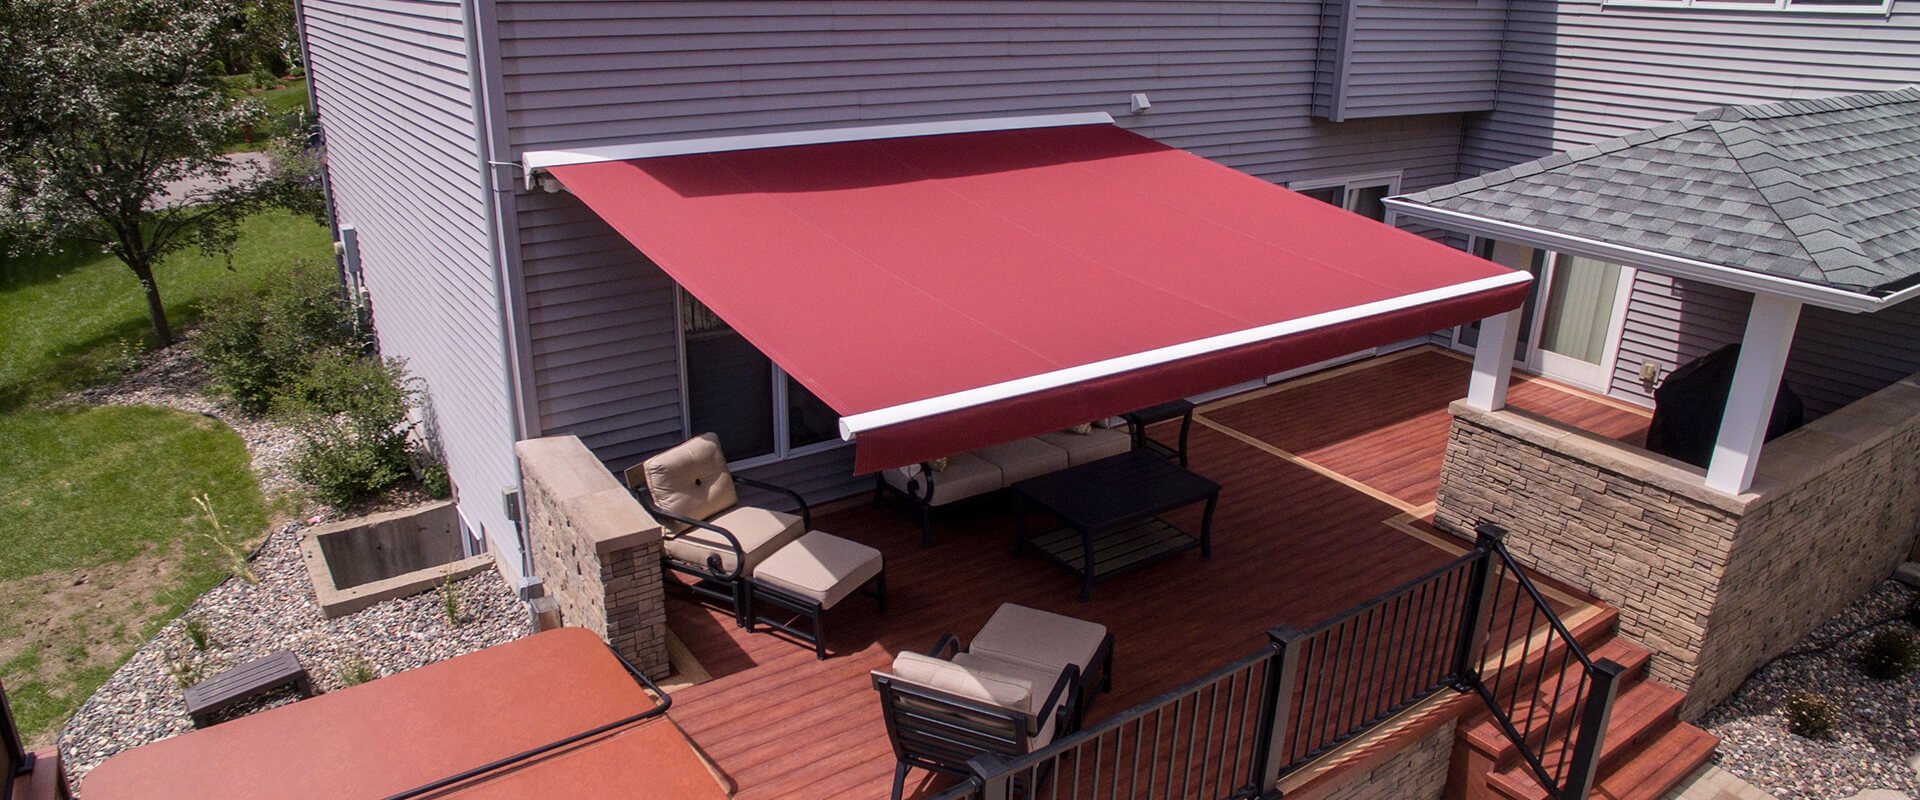 What Weather Conditions Do Awnings Protect From?